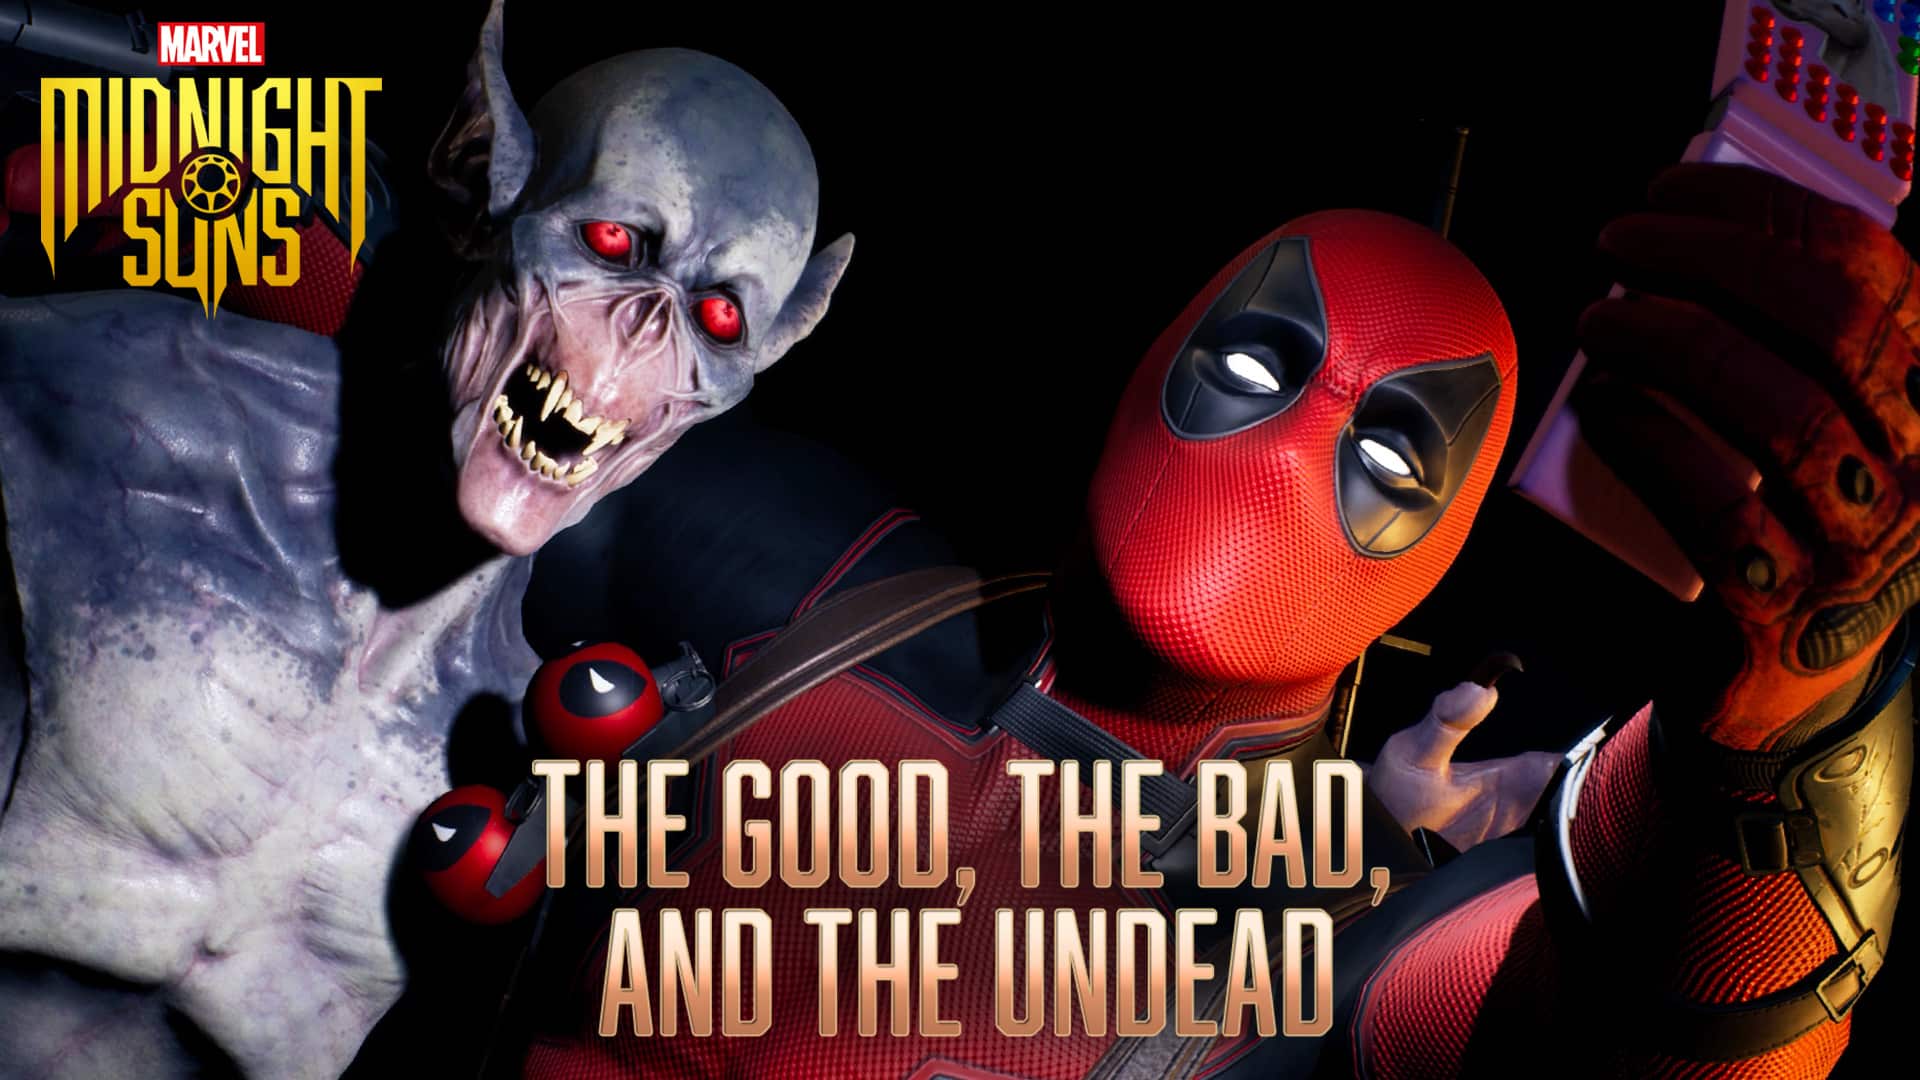 Marvels-Midnight-Suns-The-Good-the-Bad-and-the-Undead-Trailer-Thumbnail